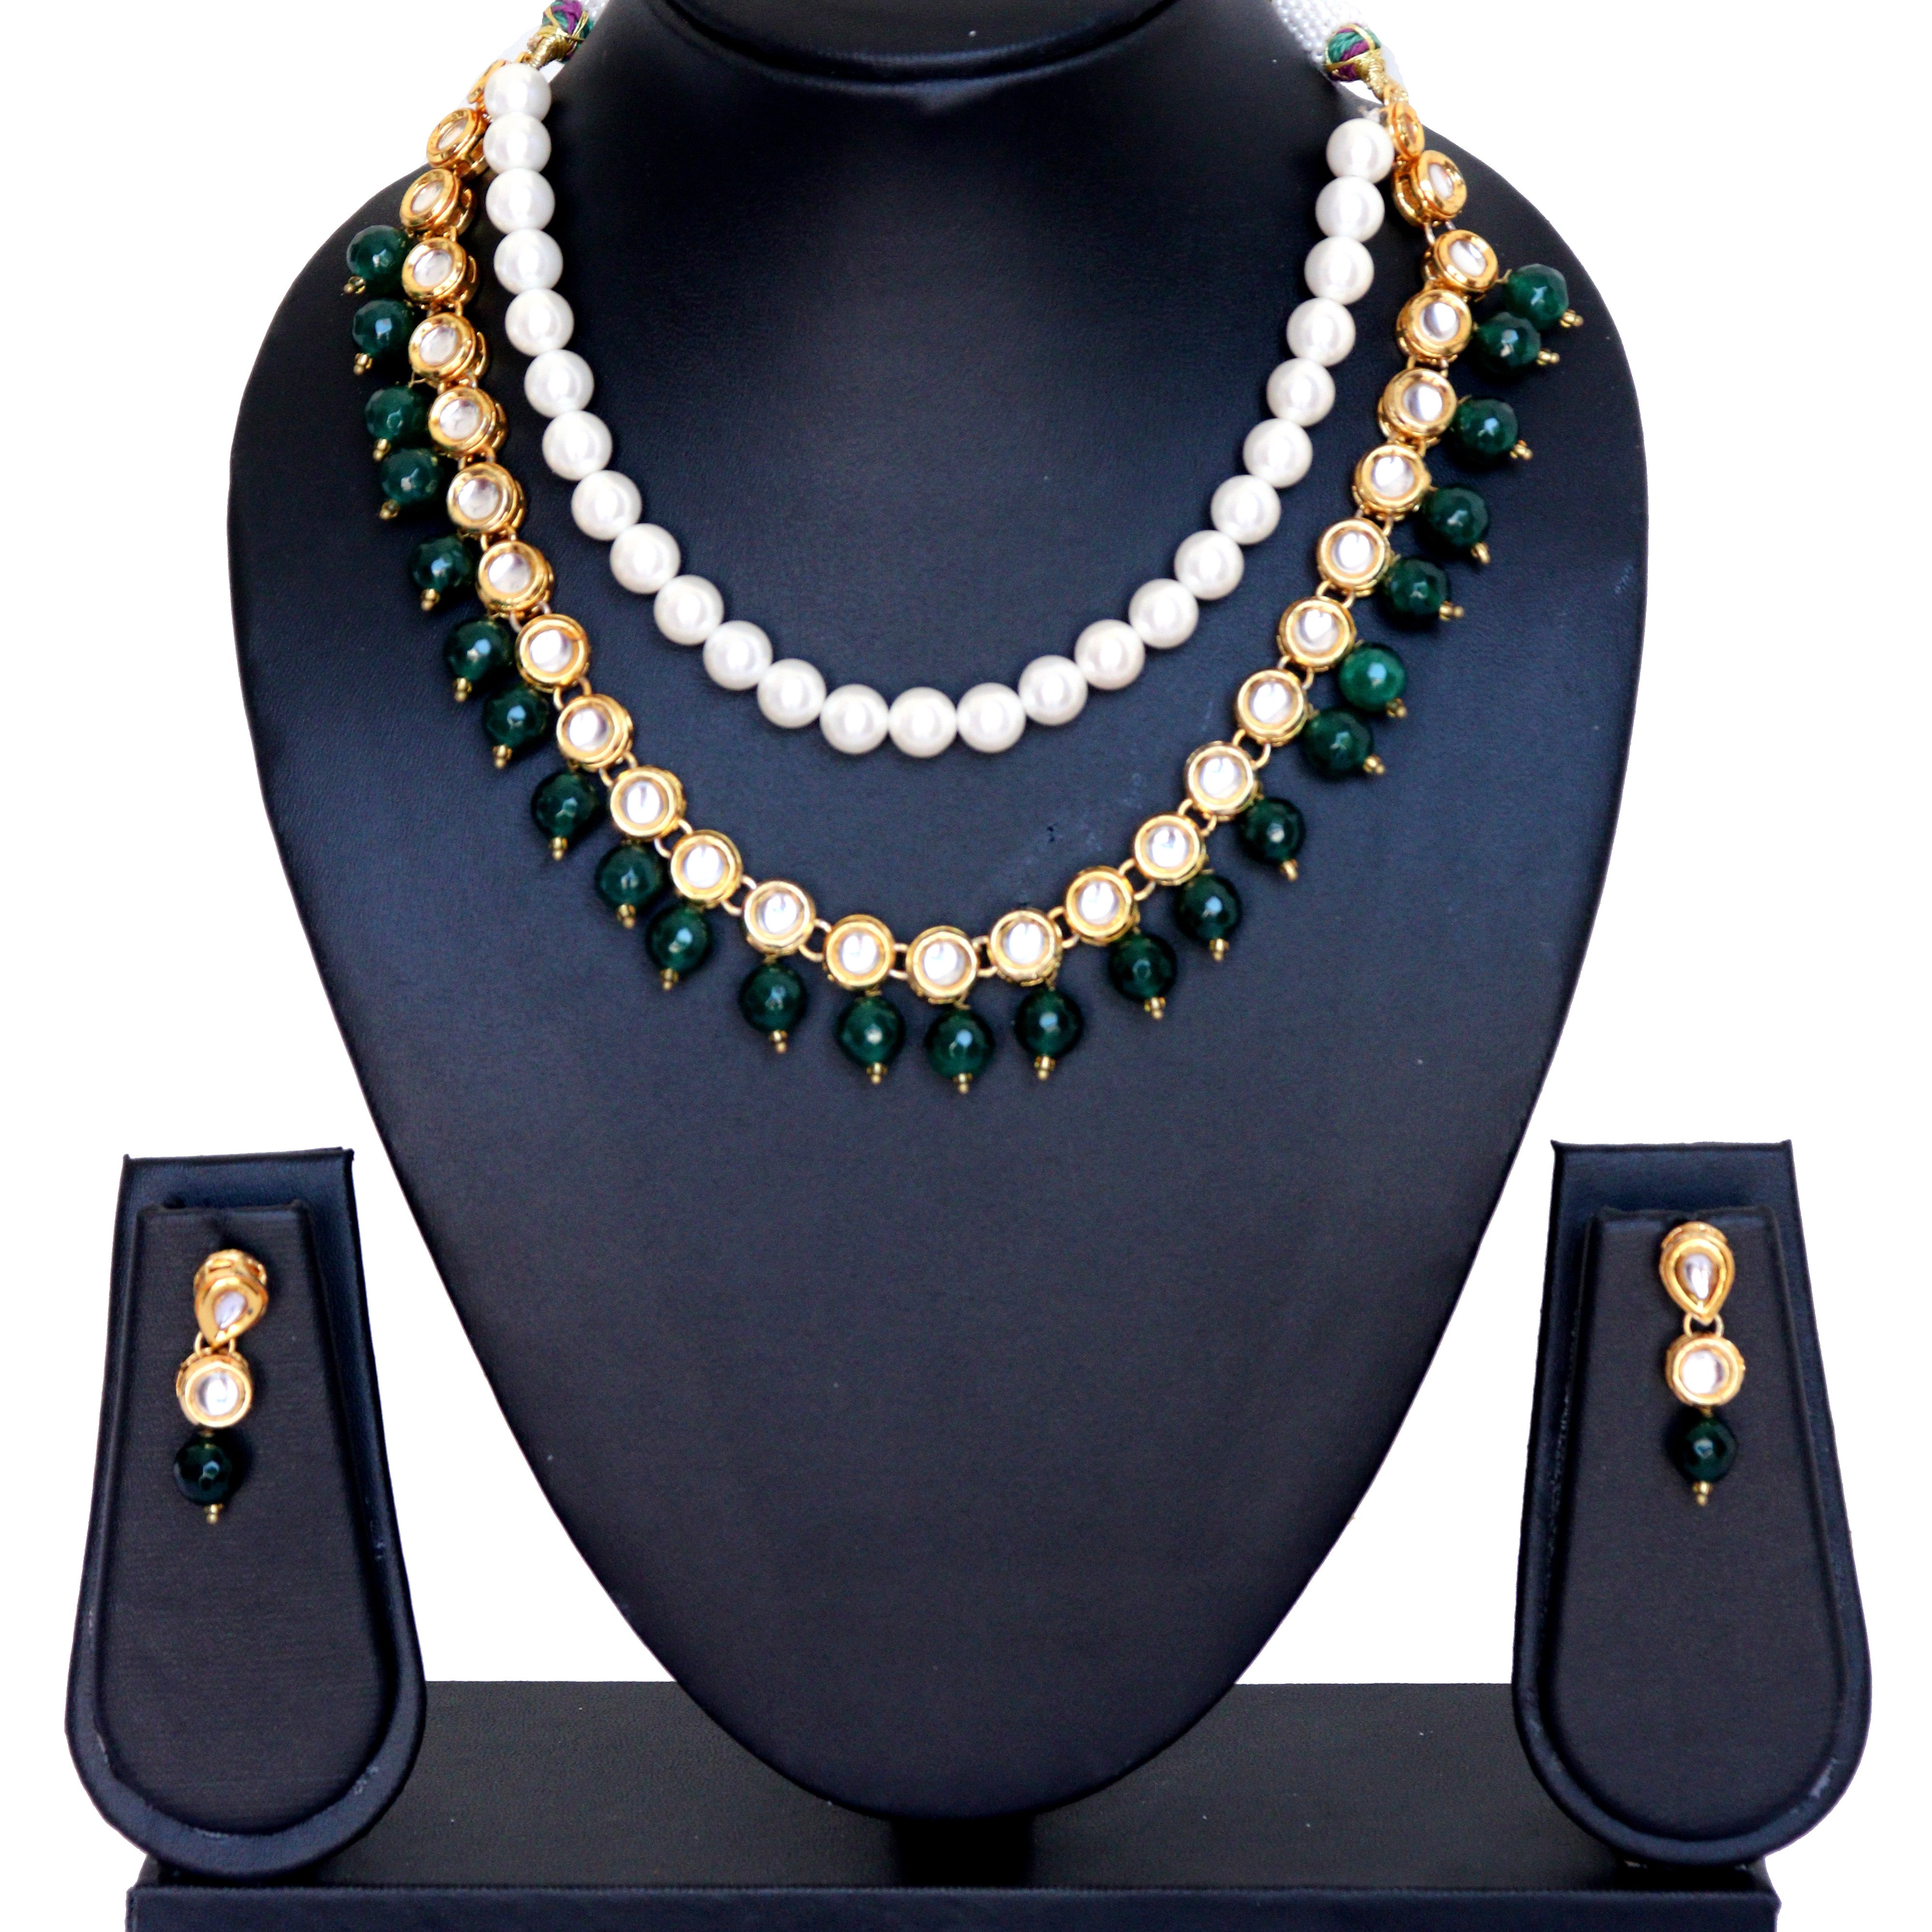 Kundan Necklace Set with White Pearls